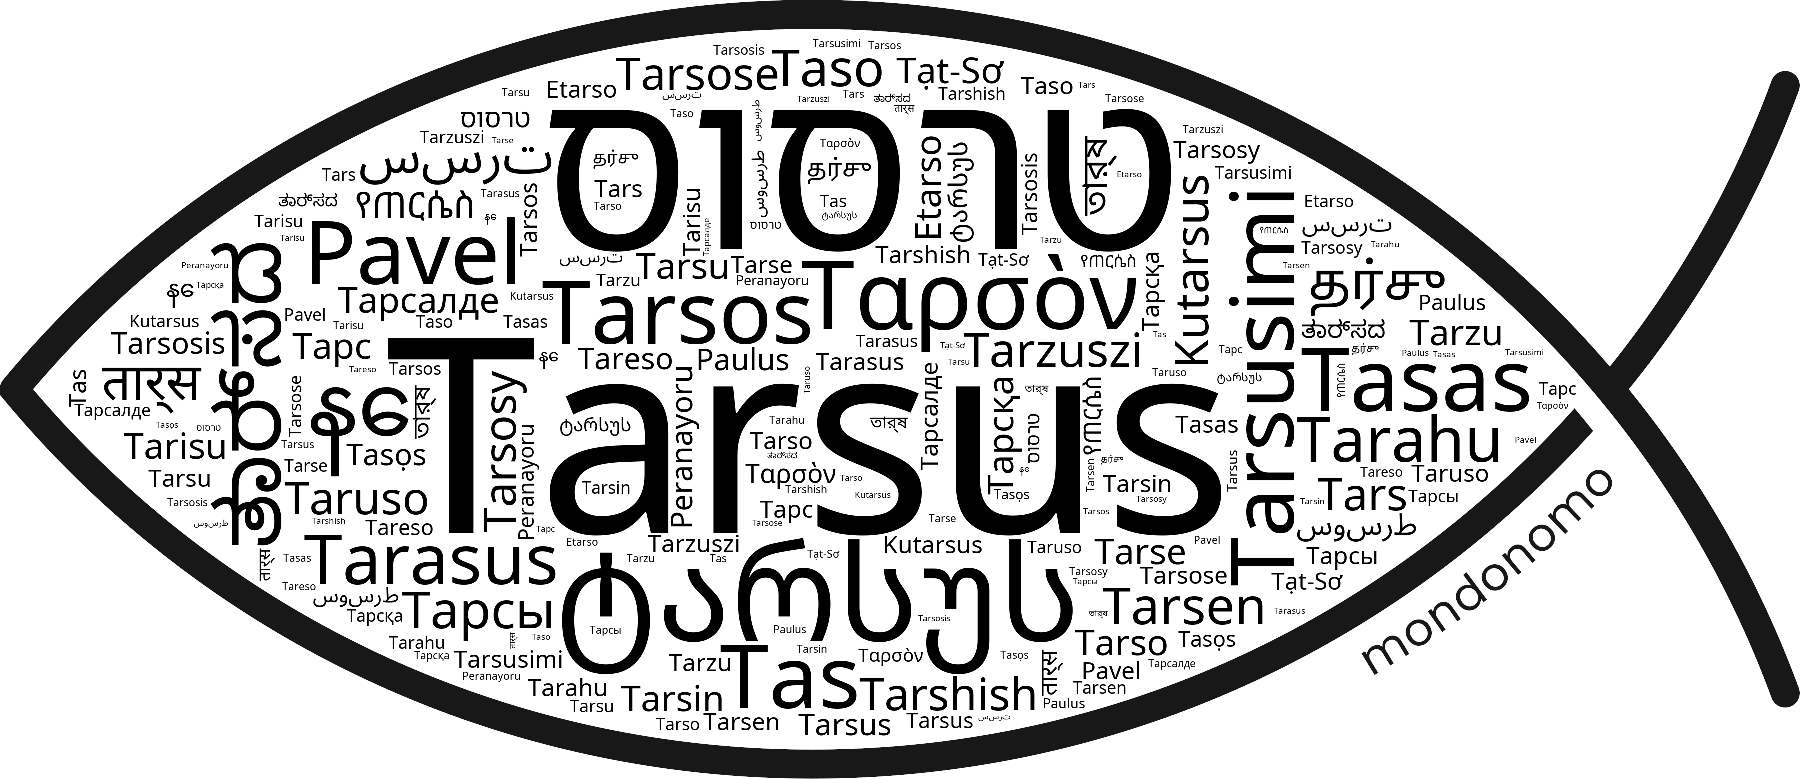 Name Tarsus in the world's Bibles